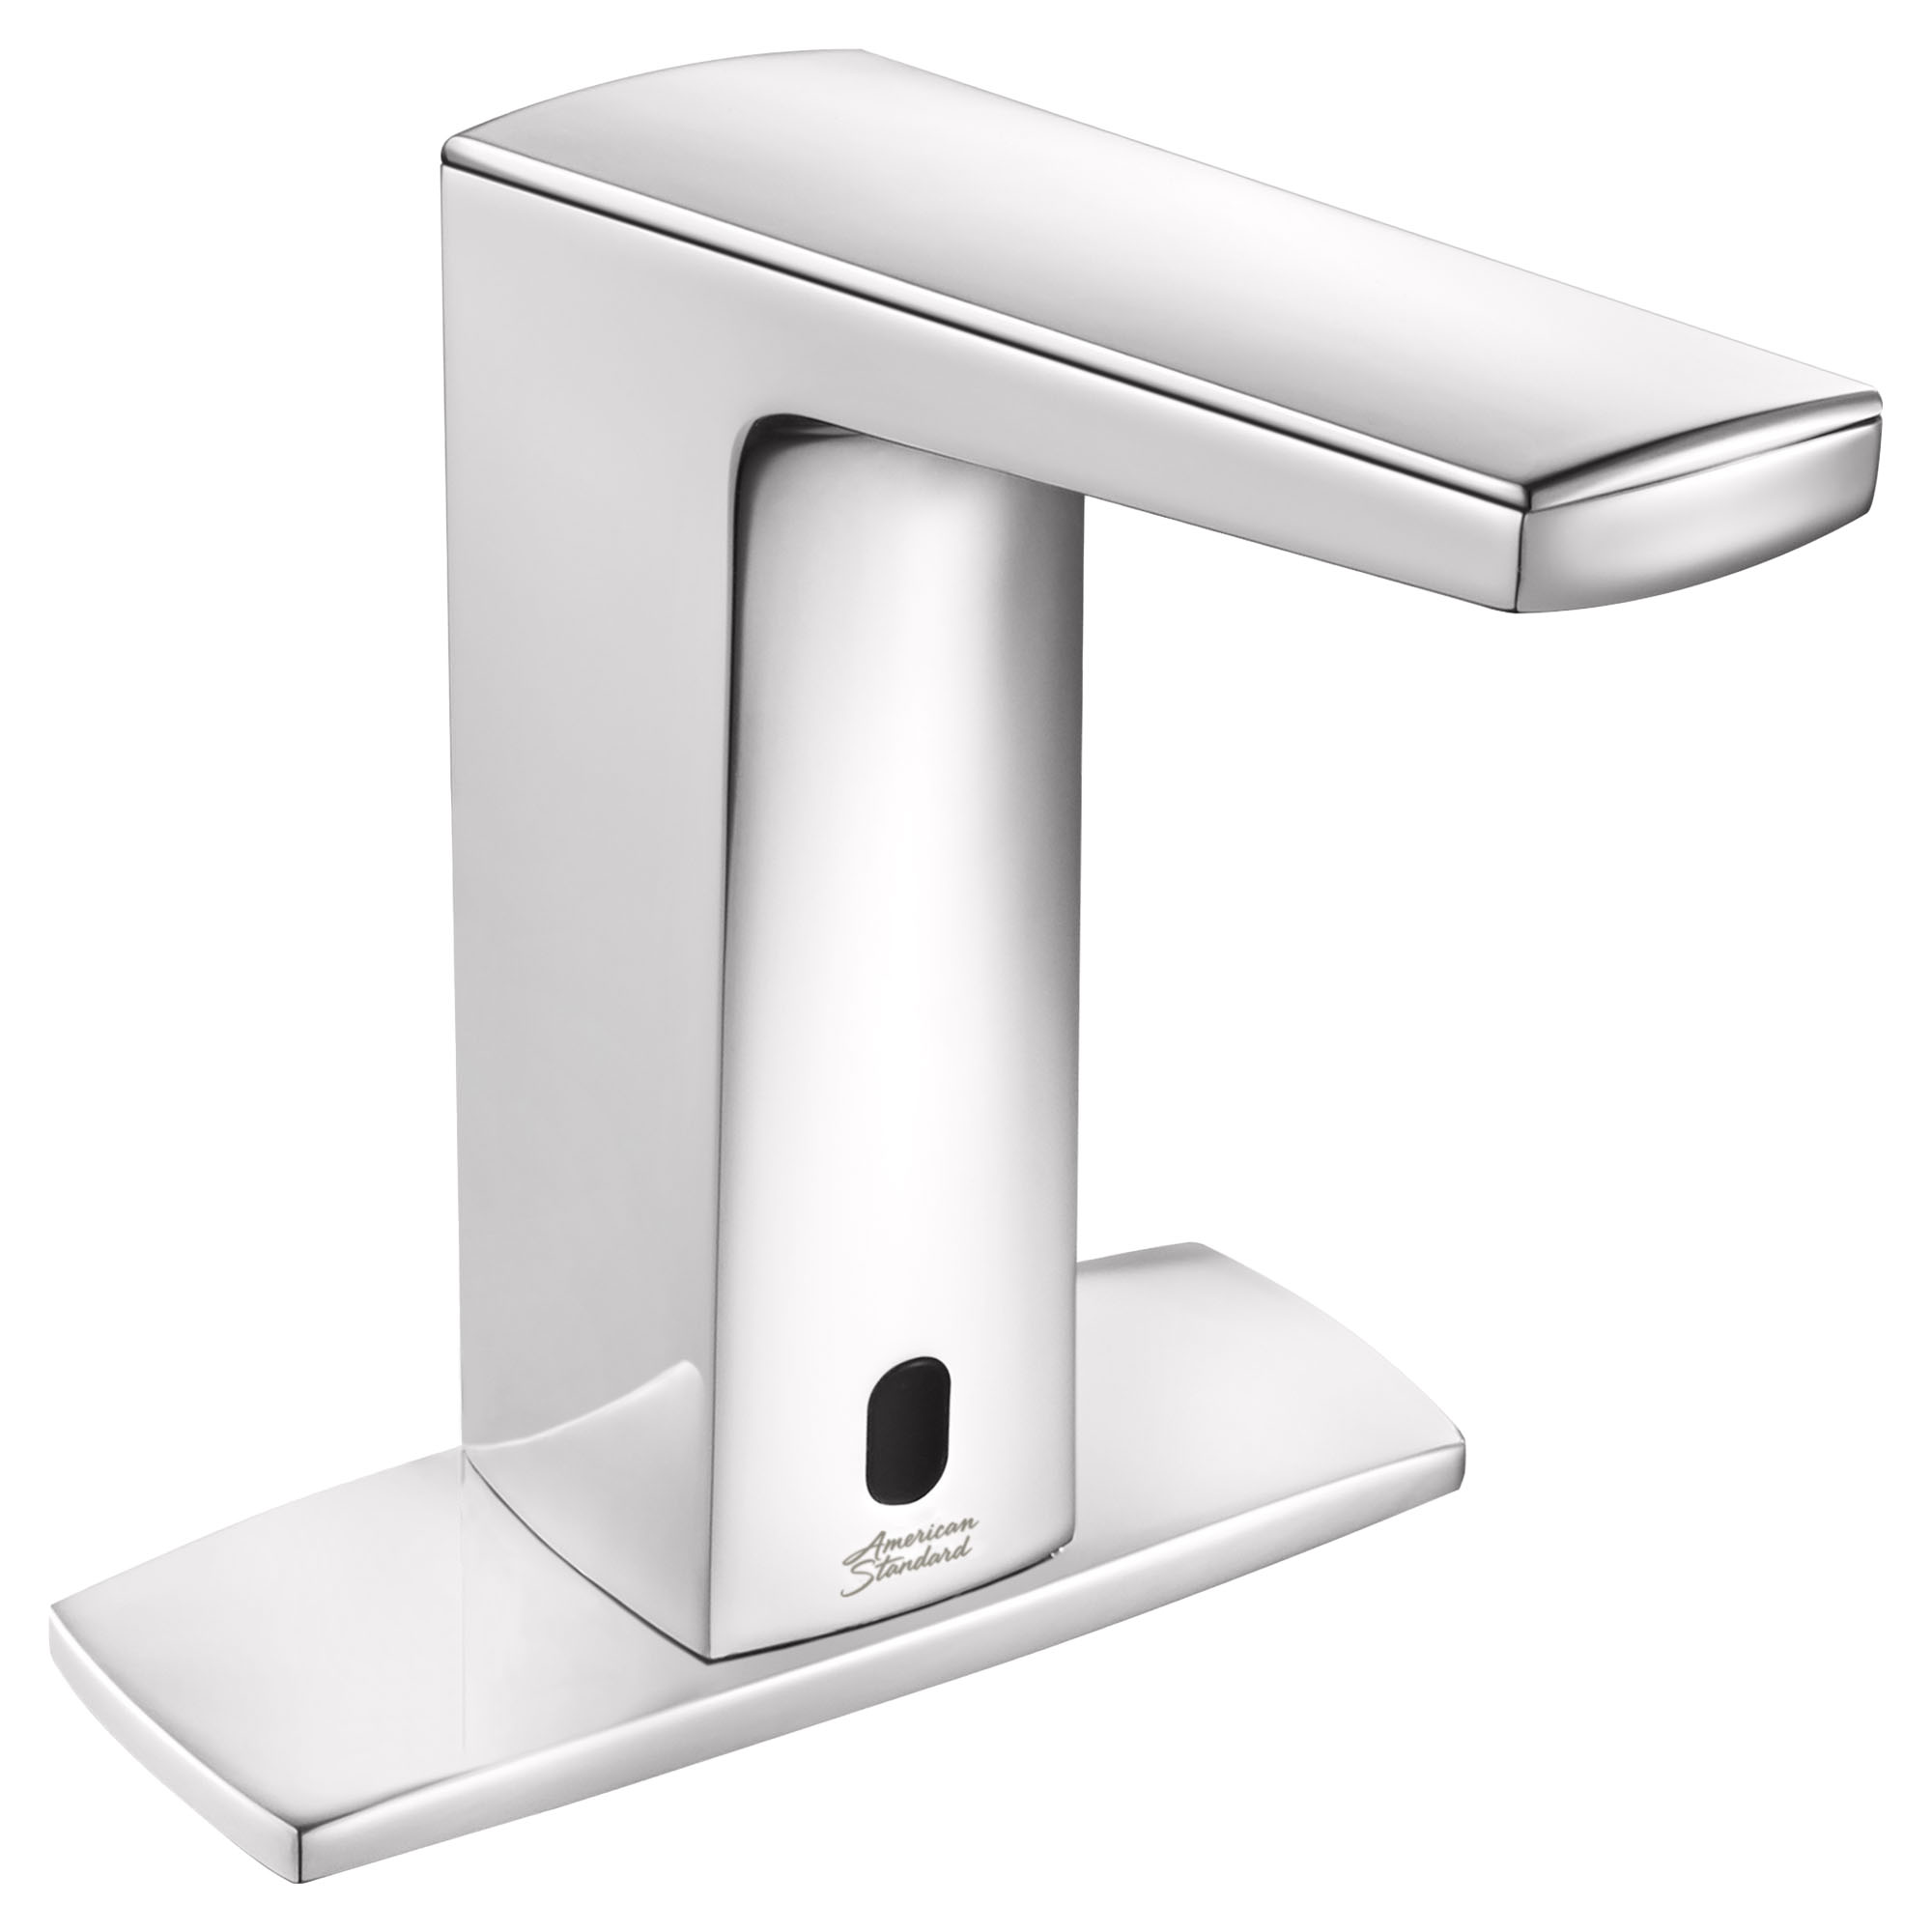 Paradigm™ Selectronic™ Touchless Faucet, Battery-Powered With Above-Deck Mixing, 0.5 gpm/1.9 Lpm